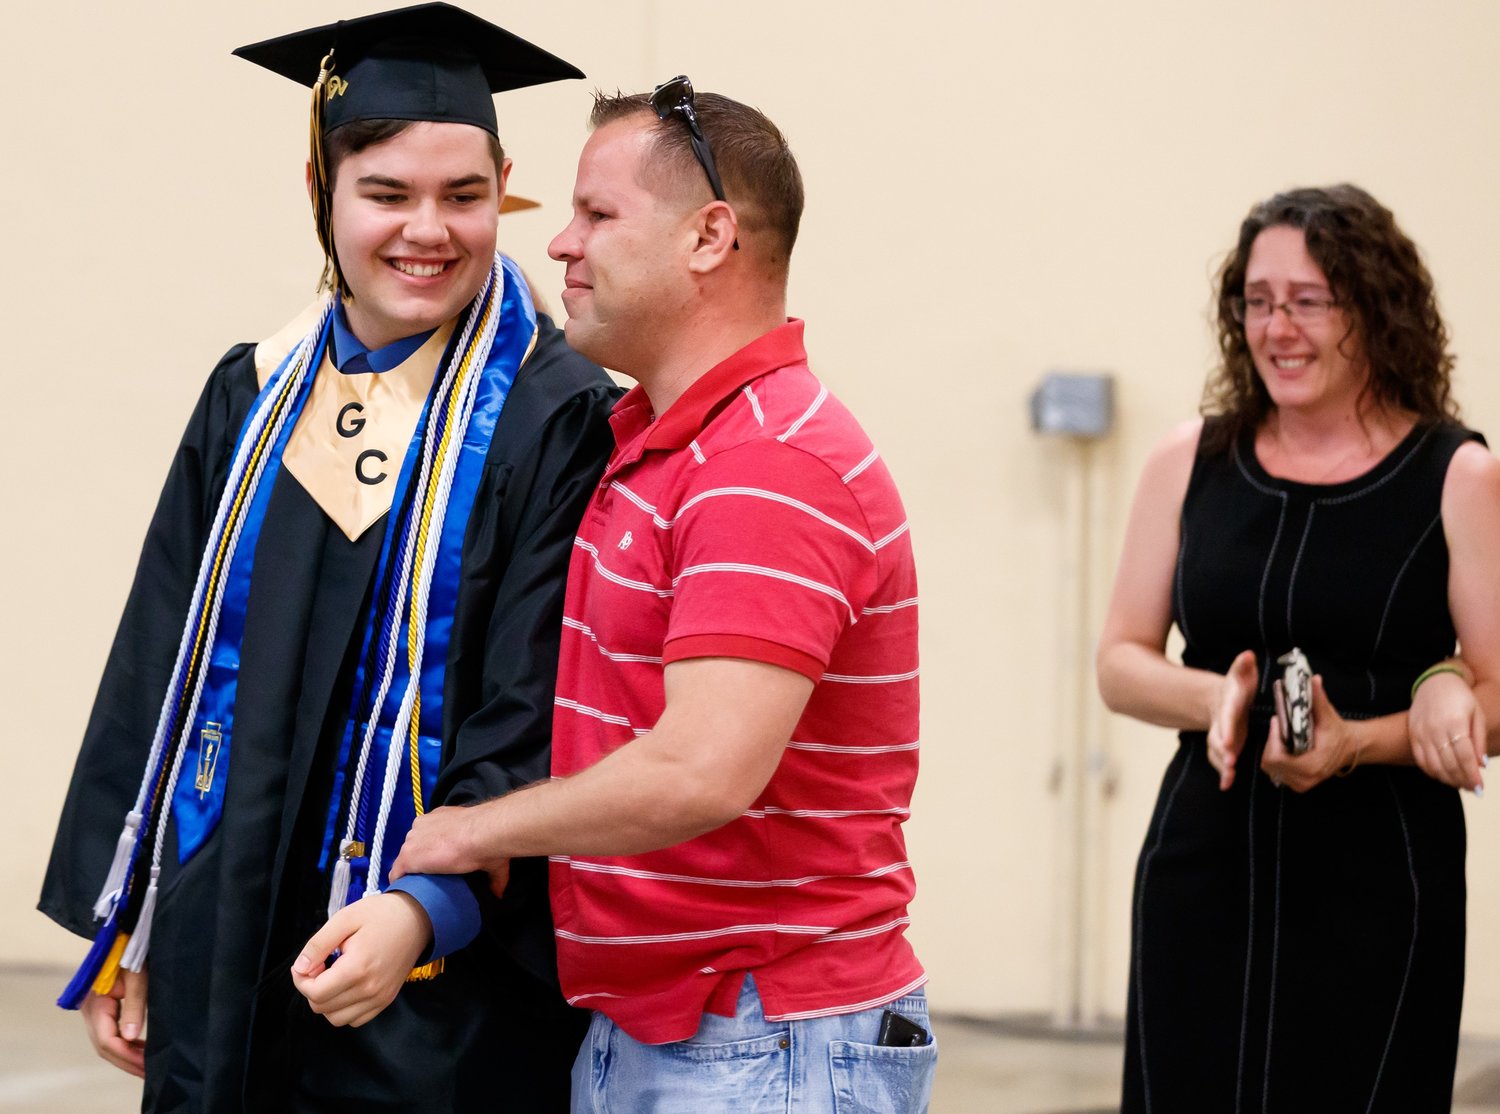 Army Sgt. 1st Class William Dubnansky surprised his son, Alex Anderson, when he came home from deployment in Poland to see him graduate from Gray’s Creek High School on Wednesday at the Crown Coliseum.